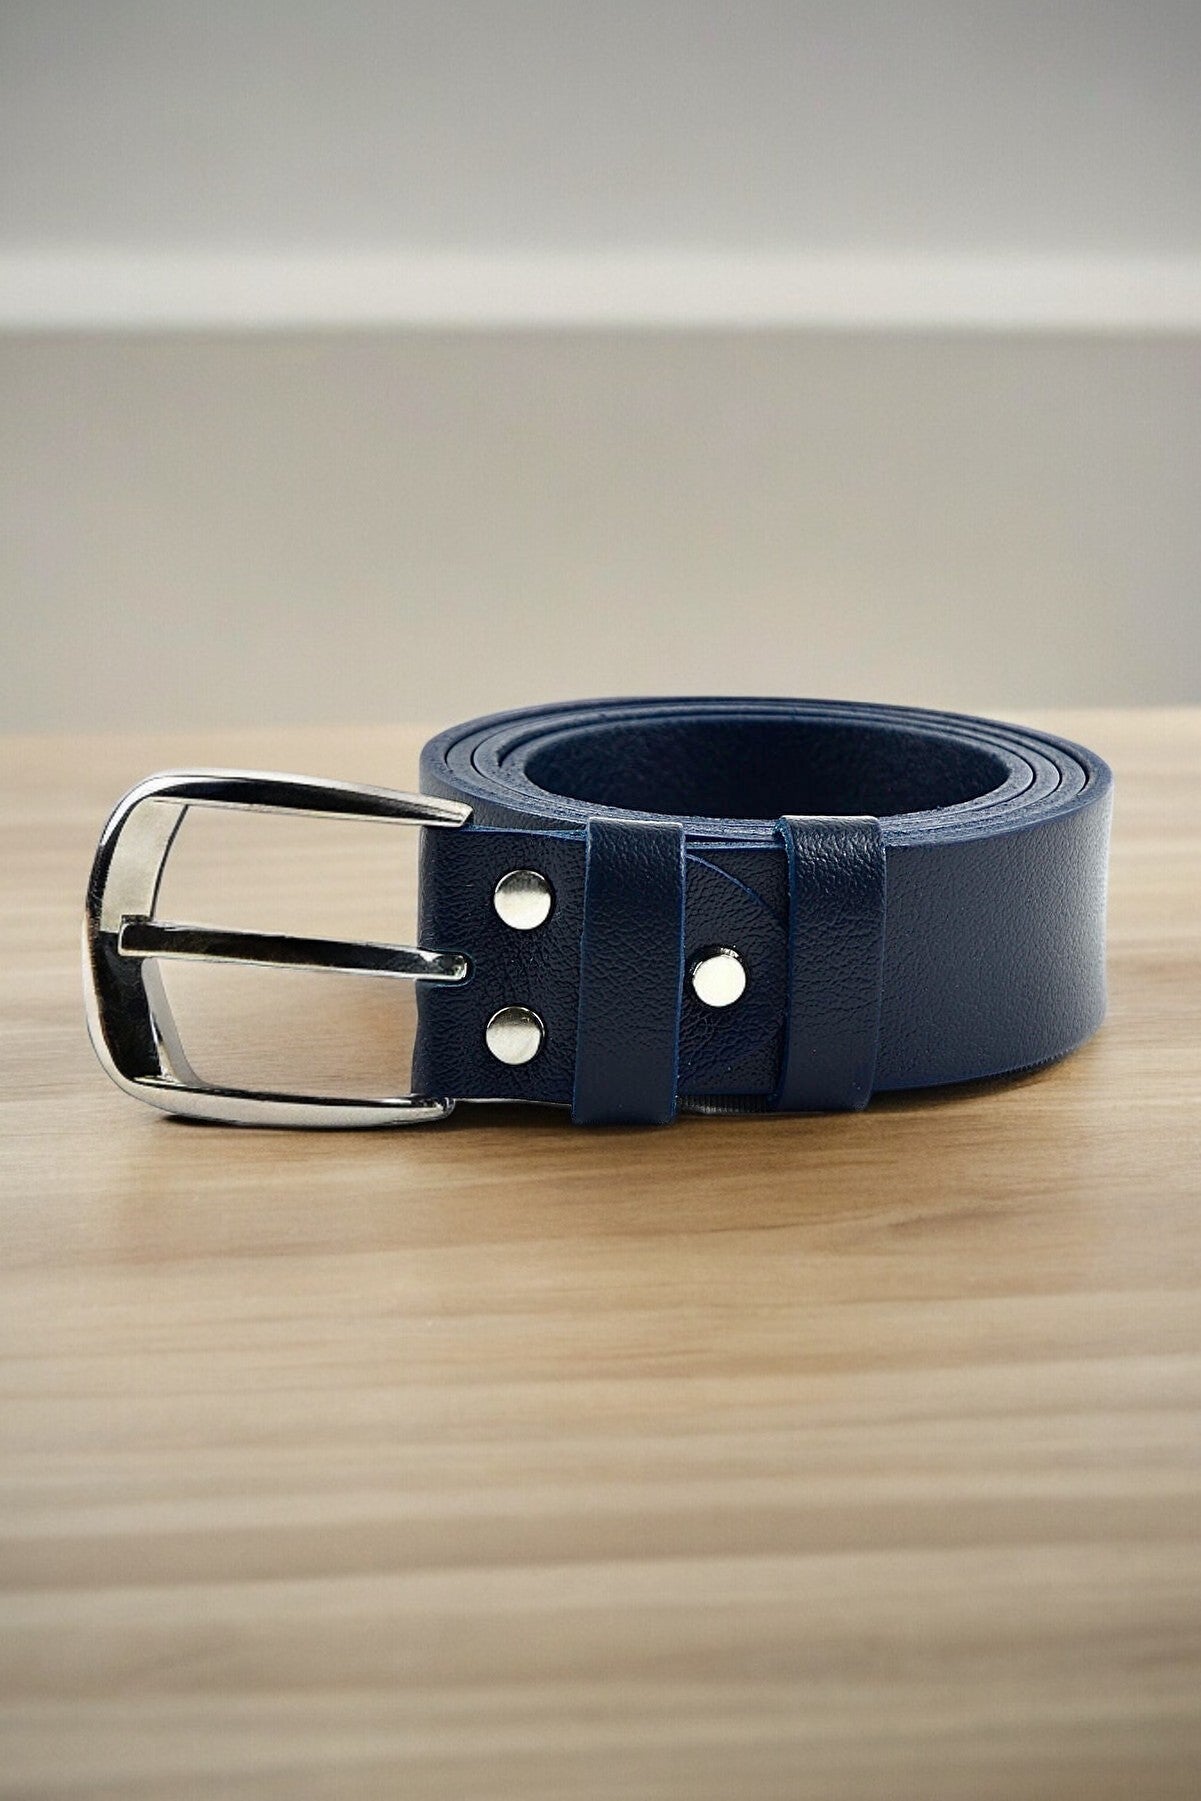 Handmade Leather Belt with Different Color Options  99percenthandmade 32" - 34" Waist inches (70cm-80cm)-Small Blue 